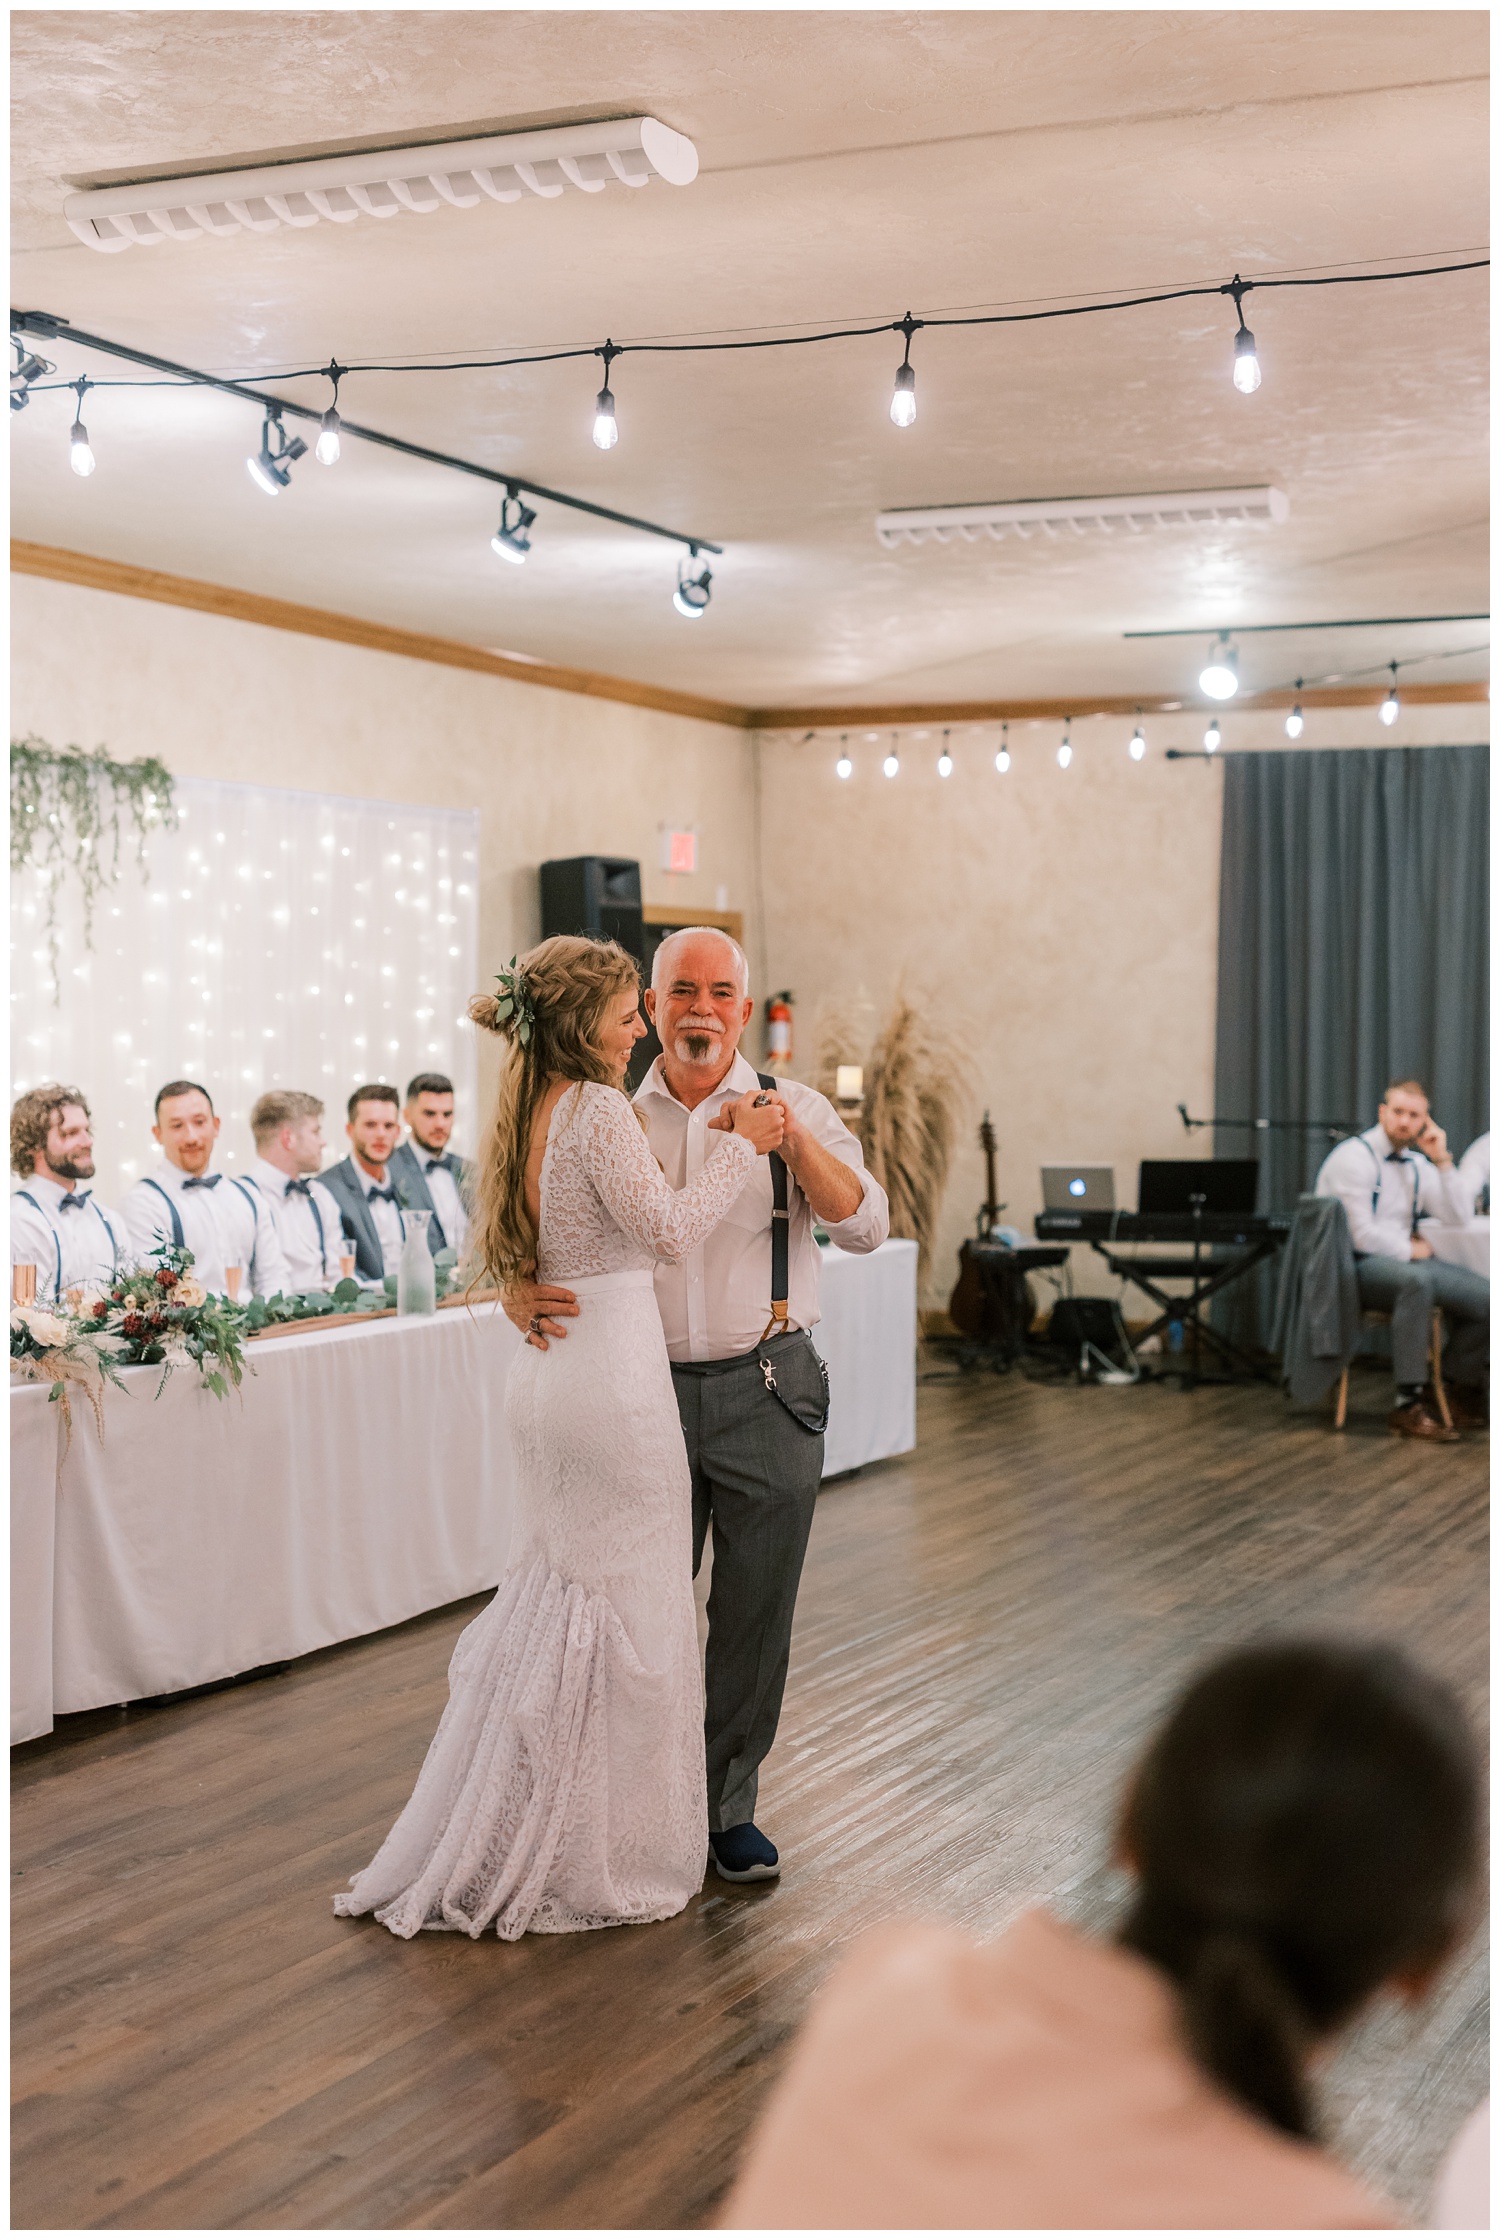 Father and daughter first dance at Illinois wedding reception